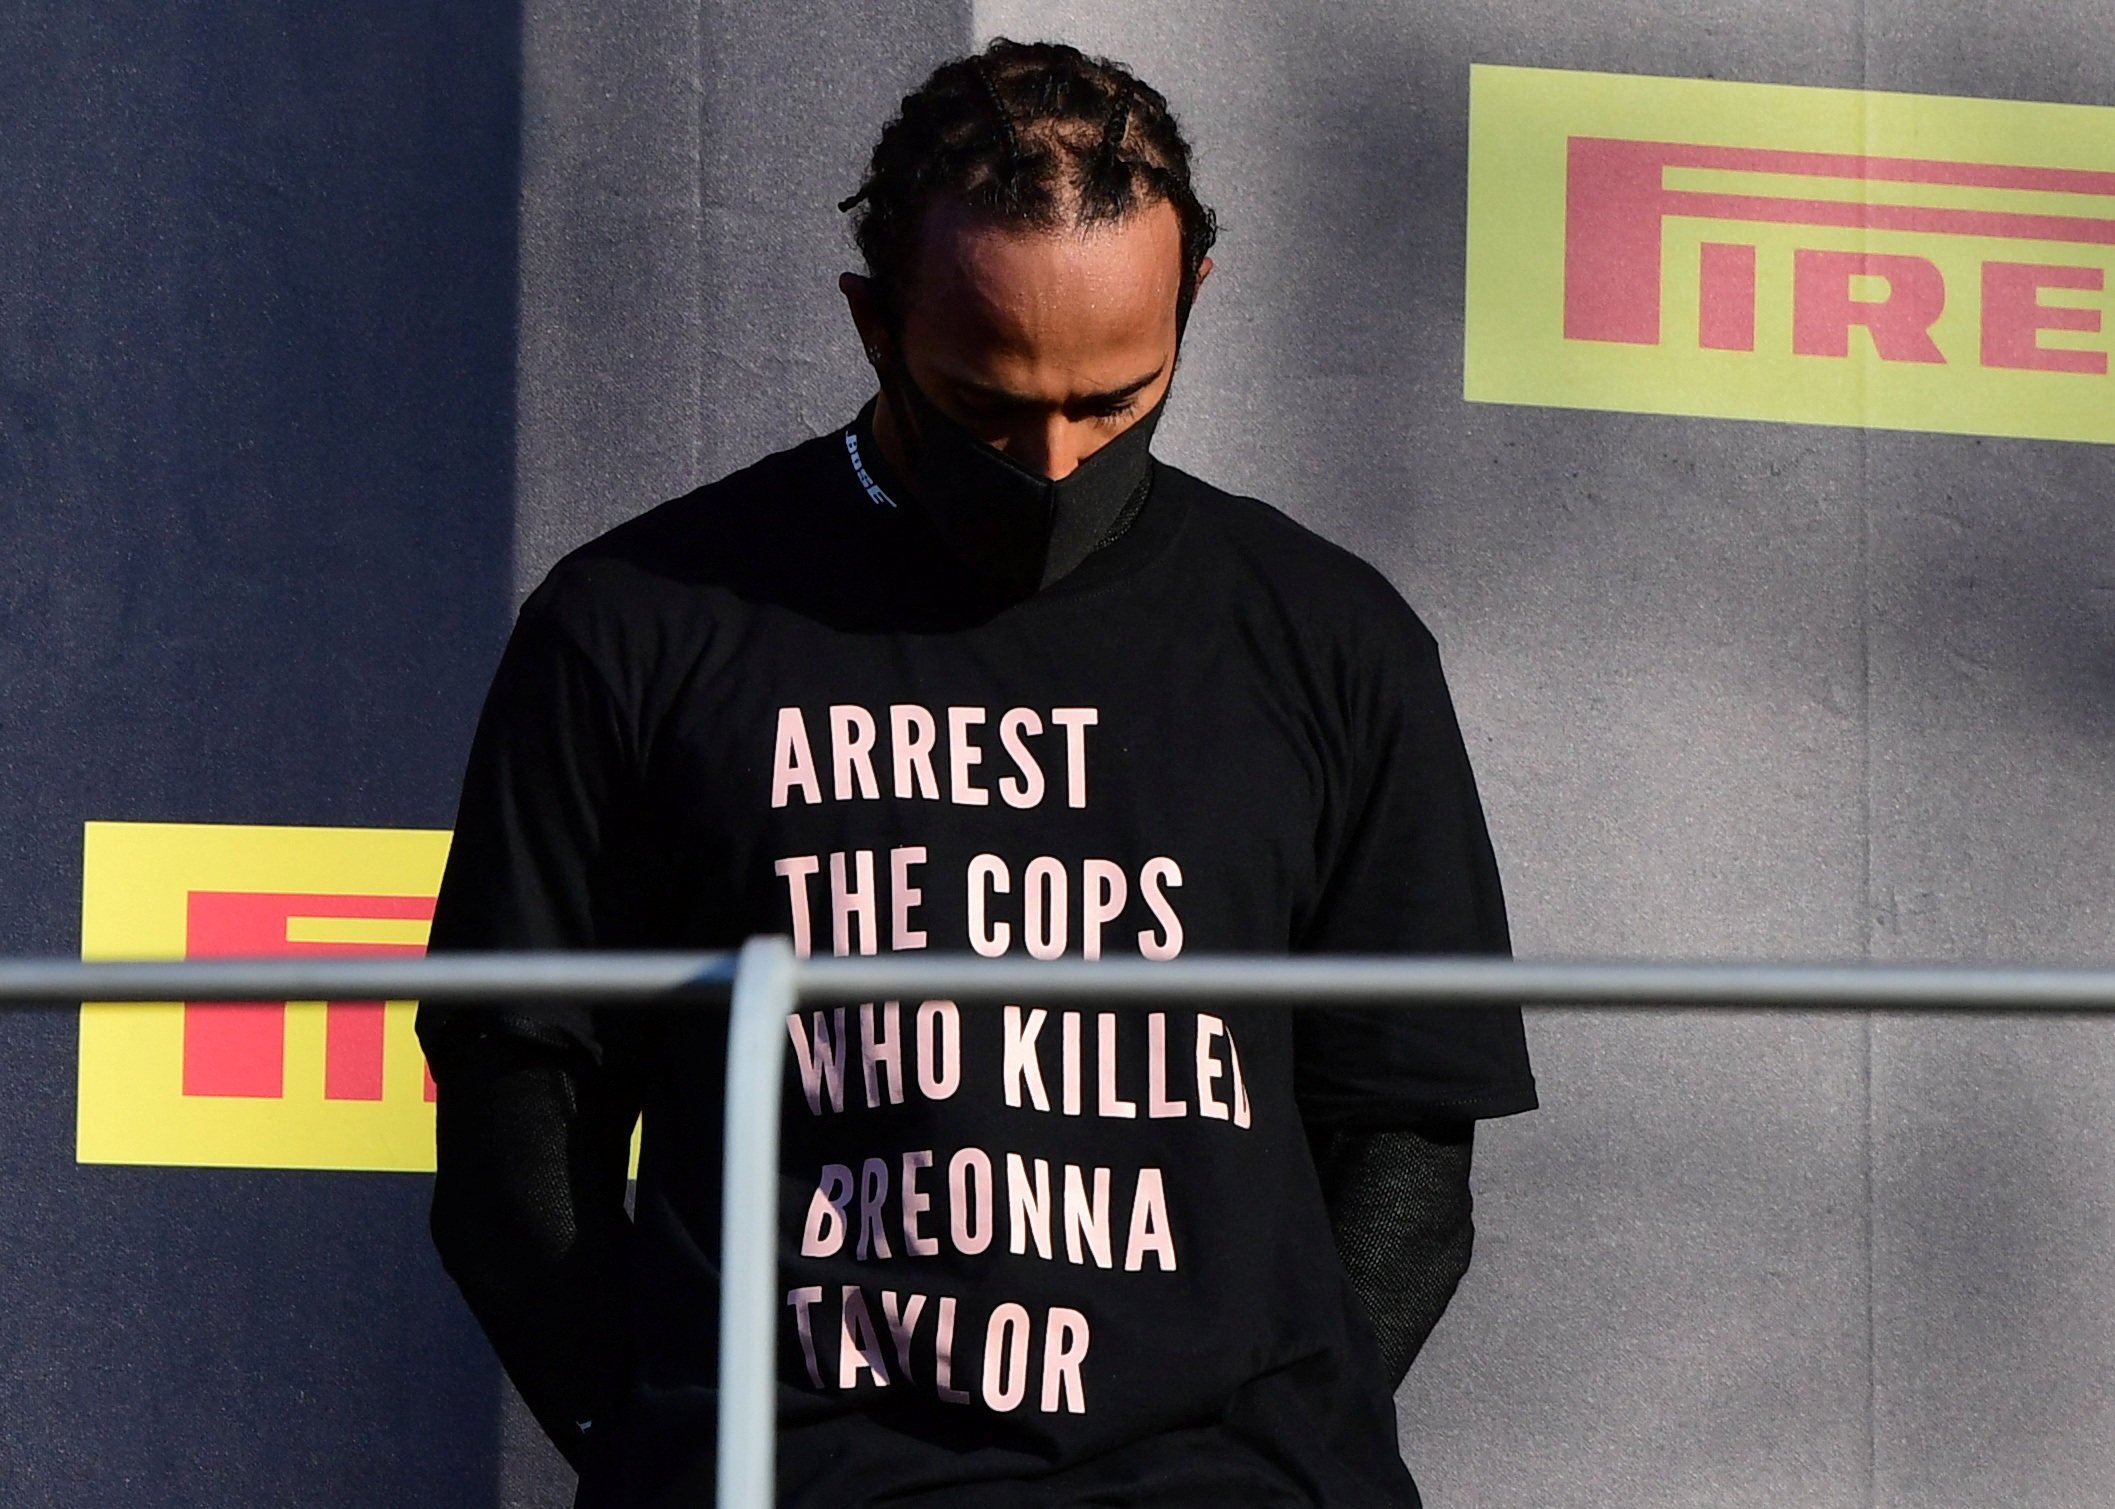 Lewis Hamilton wears a shirt in reference to Breonna Taylor on the podium after winning the Tuscan Grand Prix in 2020. Photo: Reuters